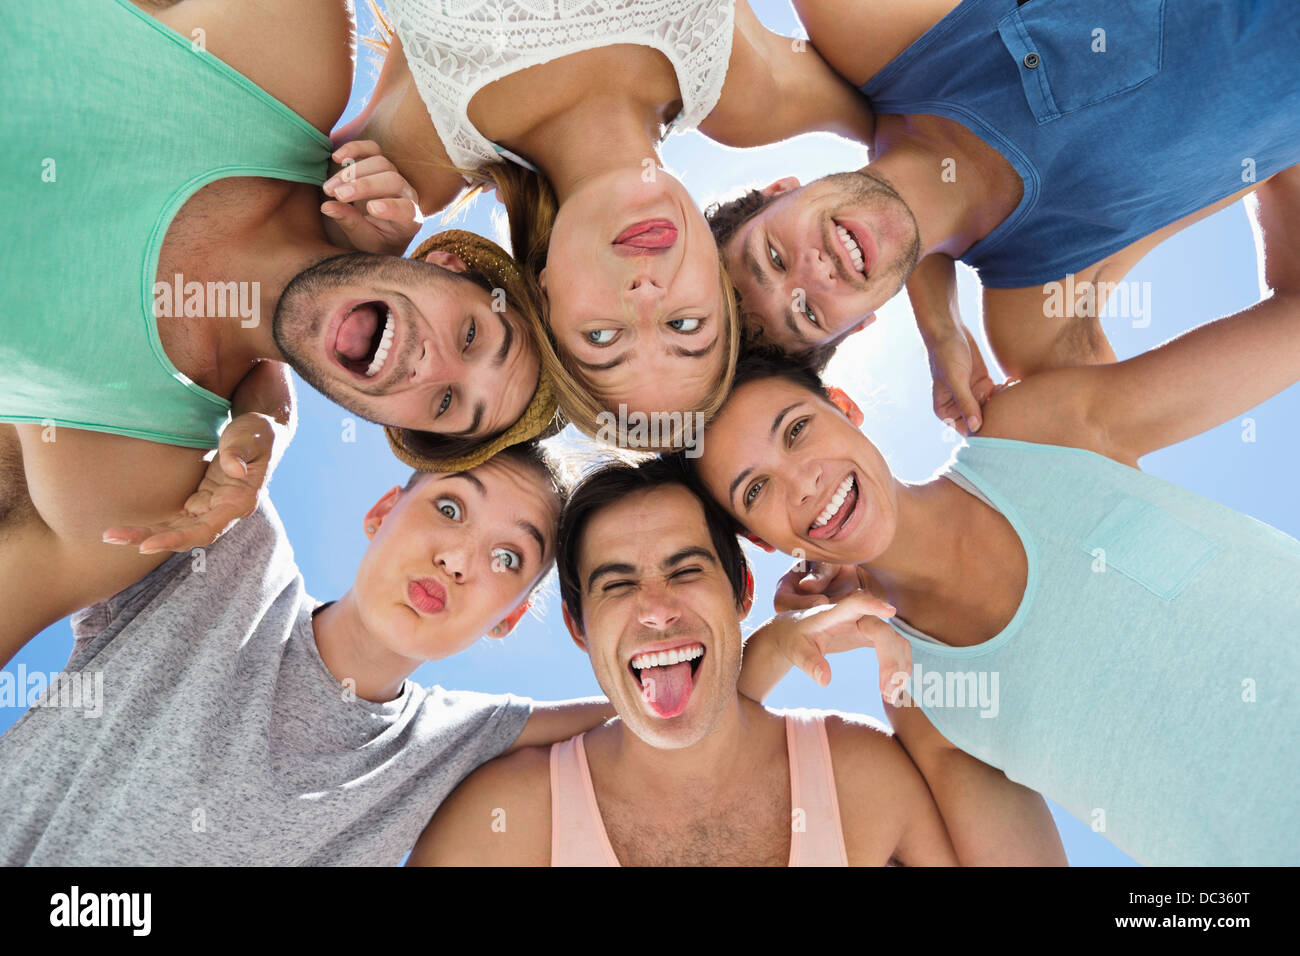 Low angle portrait of friends making silly faces Stock Photo